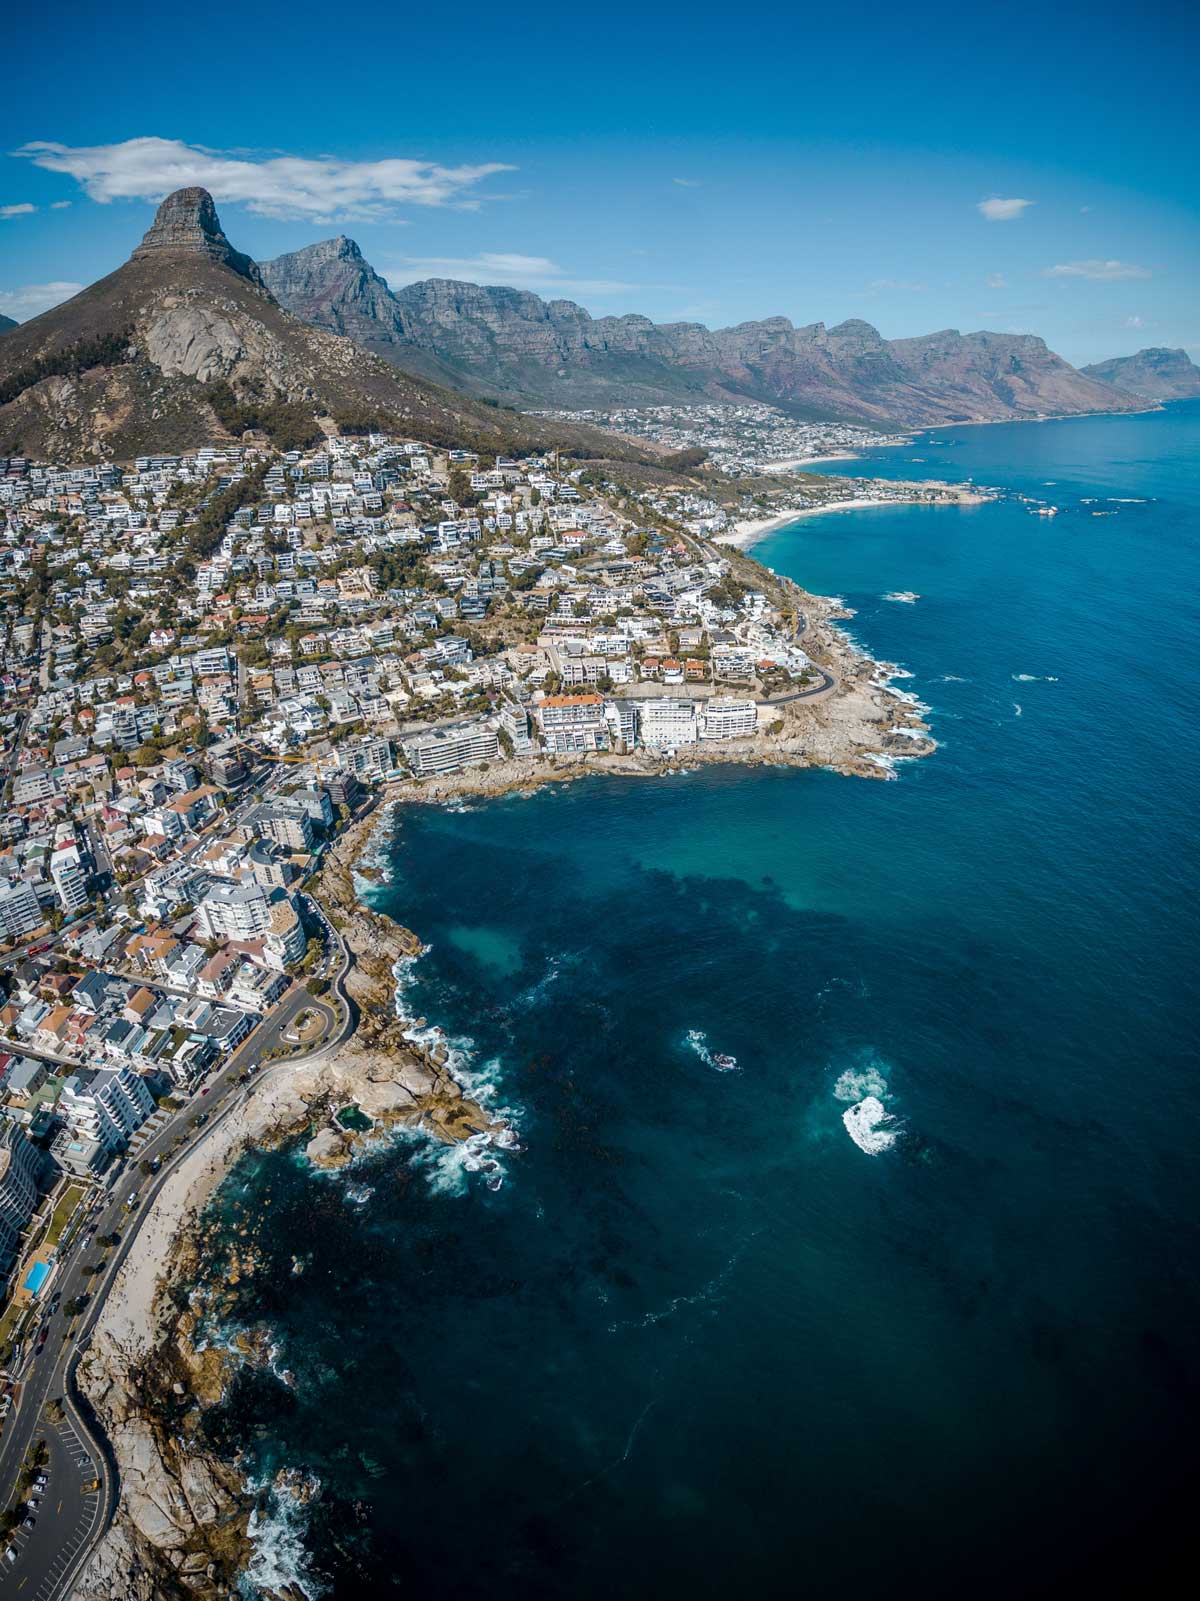 Capetown South Africa: Your Dream Vacation Awaits